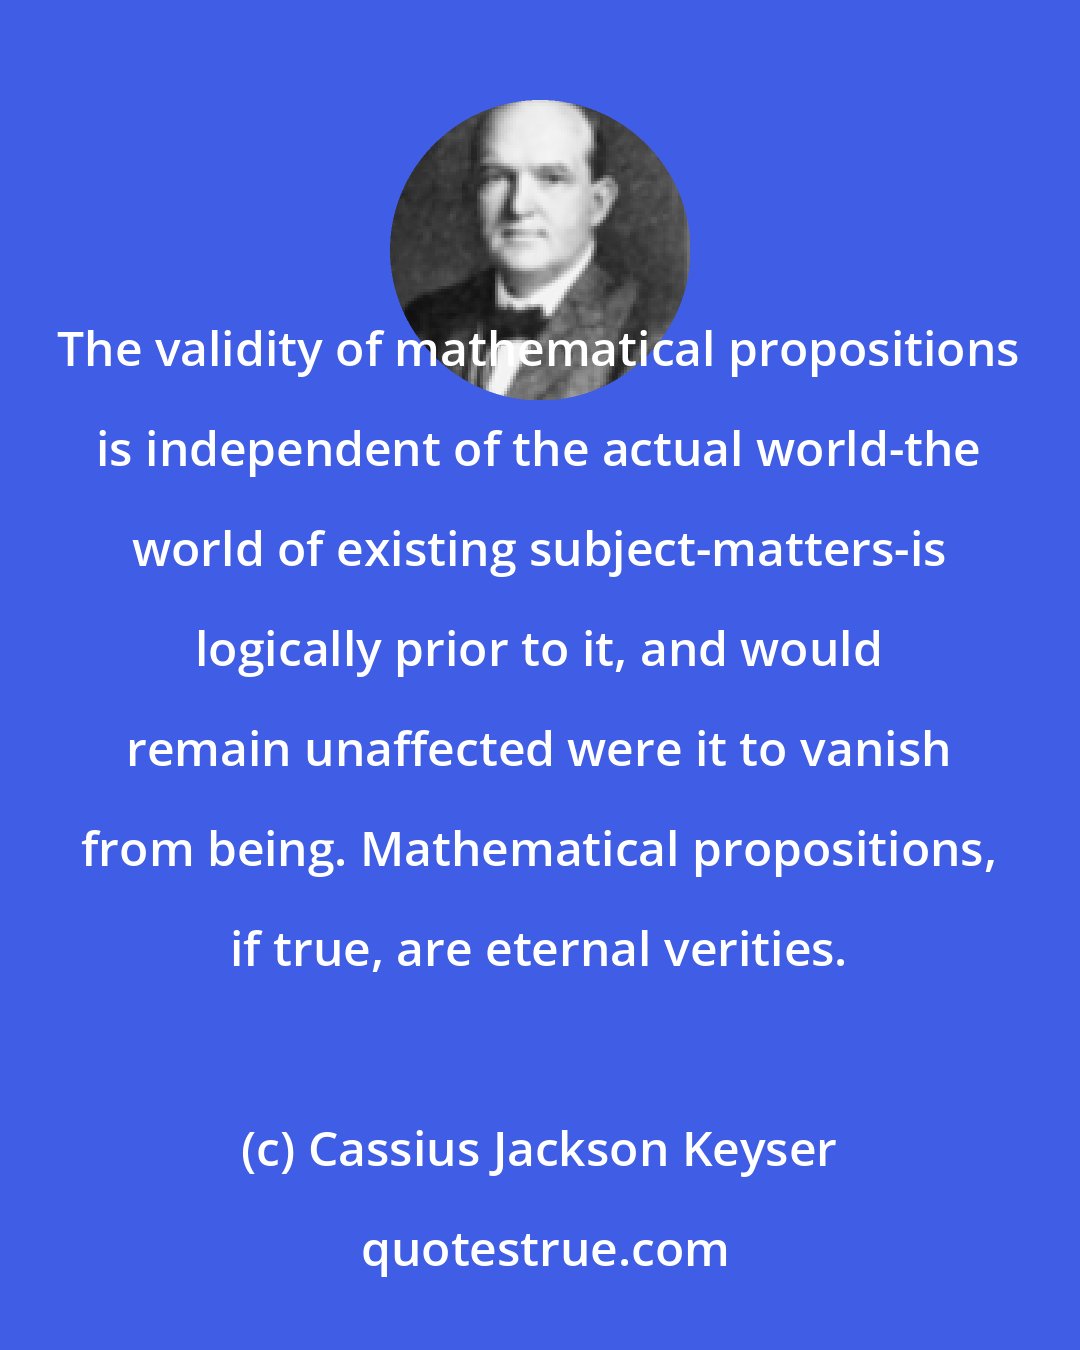 Cassius Jackson Keyser: The validity of mathematical propositions is independent of the actual world-the world of existing subject-matters-is logically prior to it, and would remain unaffected were it to vanish from being. Mathematical propositions, if true, are eternal verities.